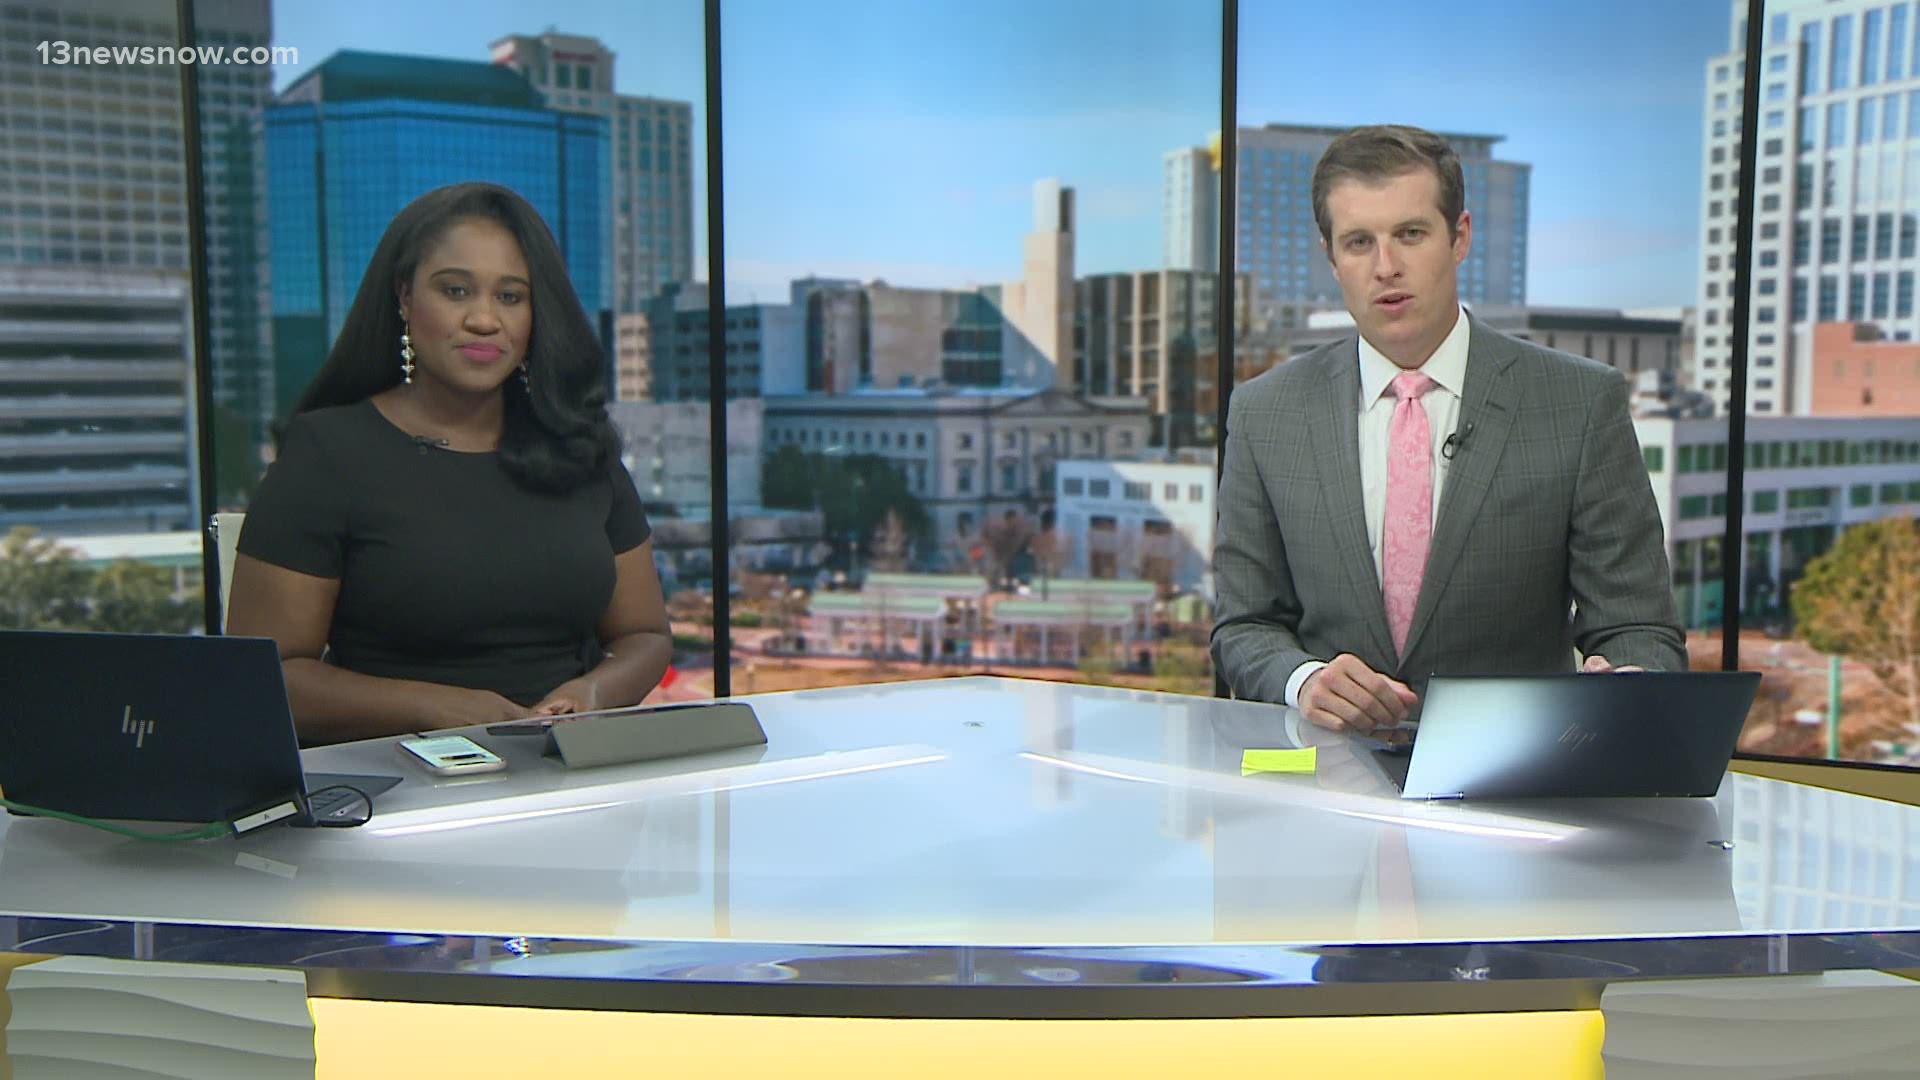 Top stories: 13News Now at noon with Ashley Smith and Dan Kennedy, June 1, 2021.